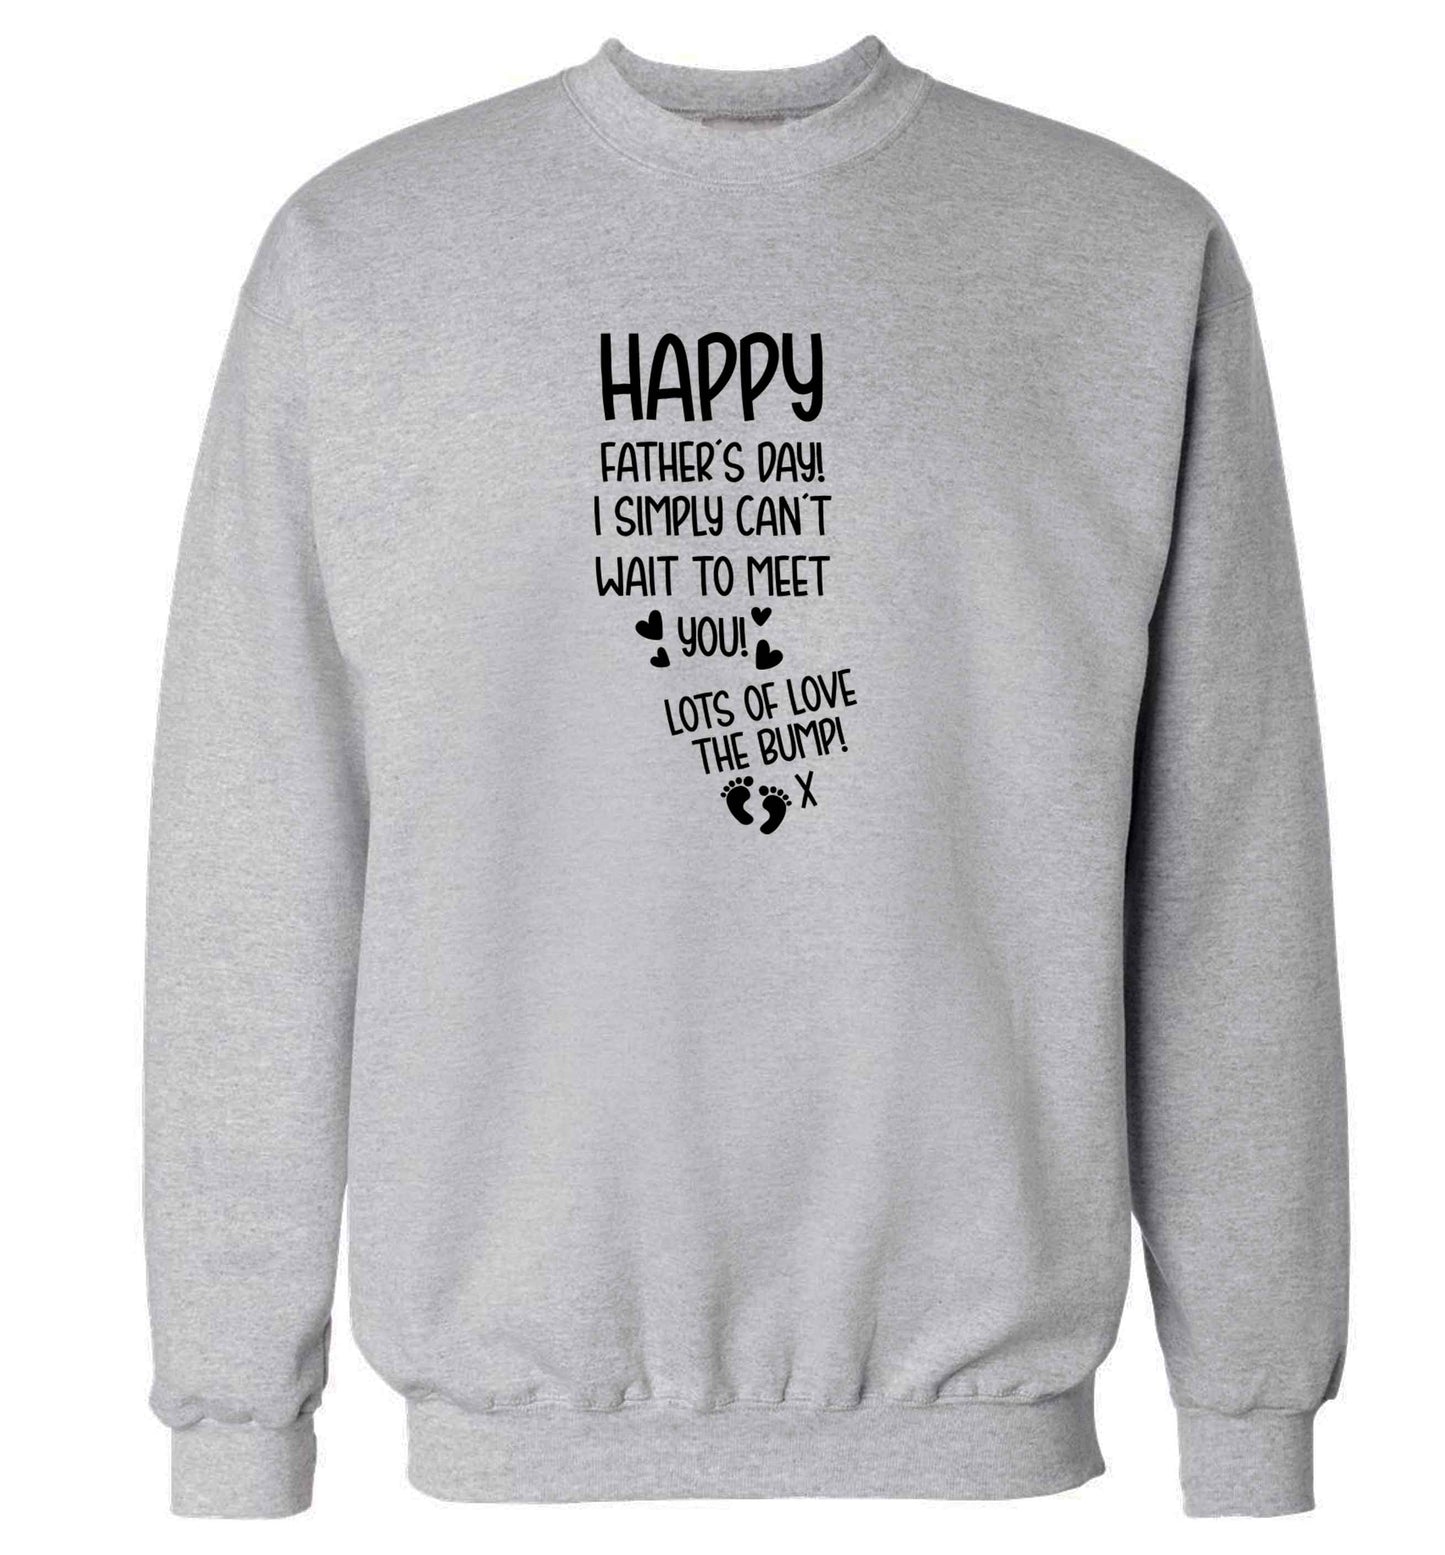 Happy Father's day daddy I can't wait to meet you lot's of love the bump! adult's unisex grey sweater 2XL